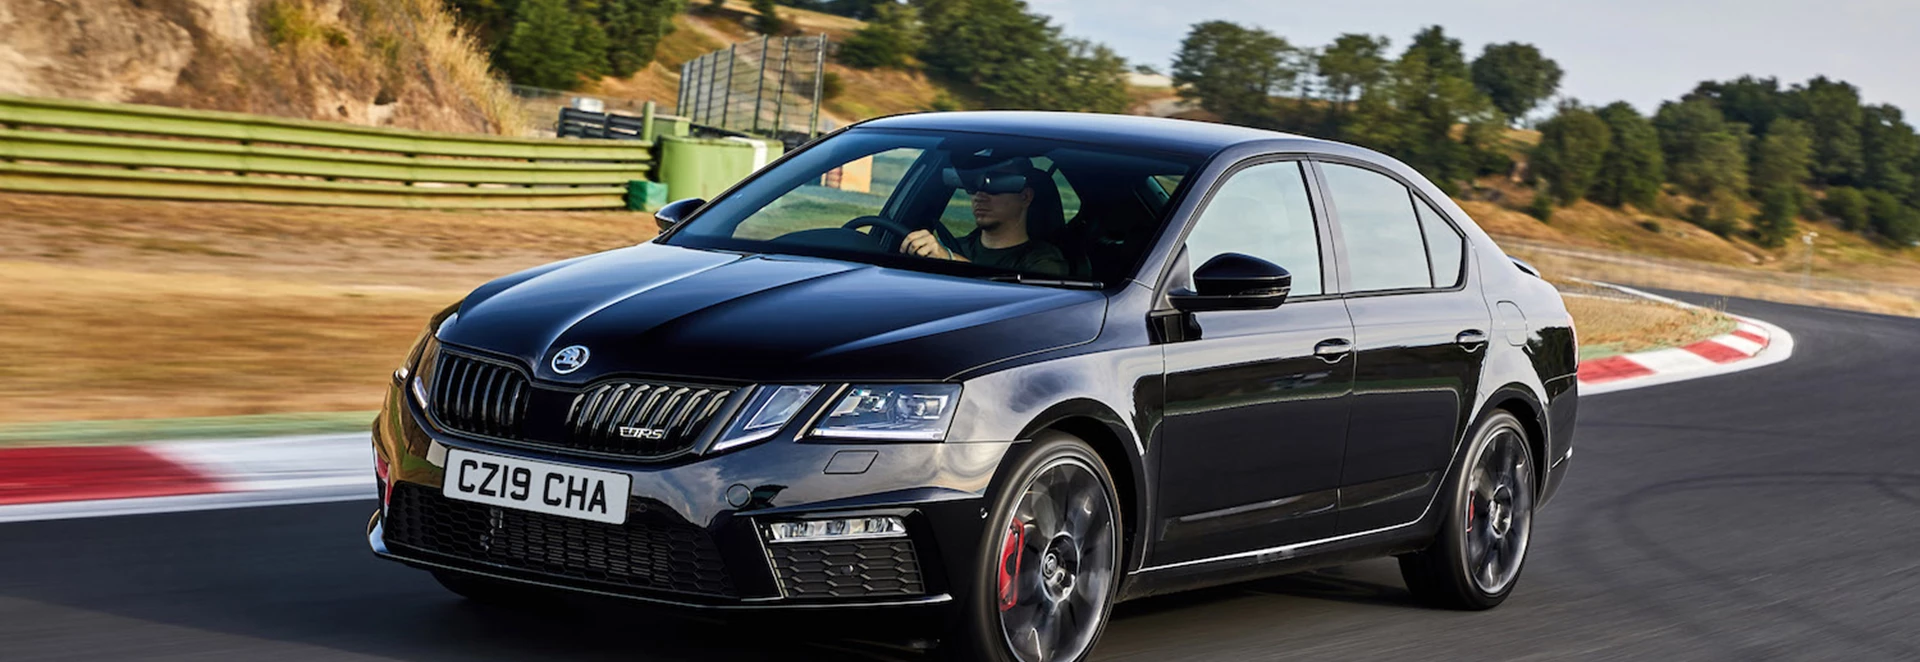 Skoda launches special edition Octavia vRS Challenge